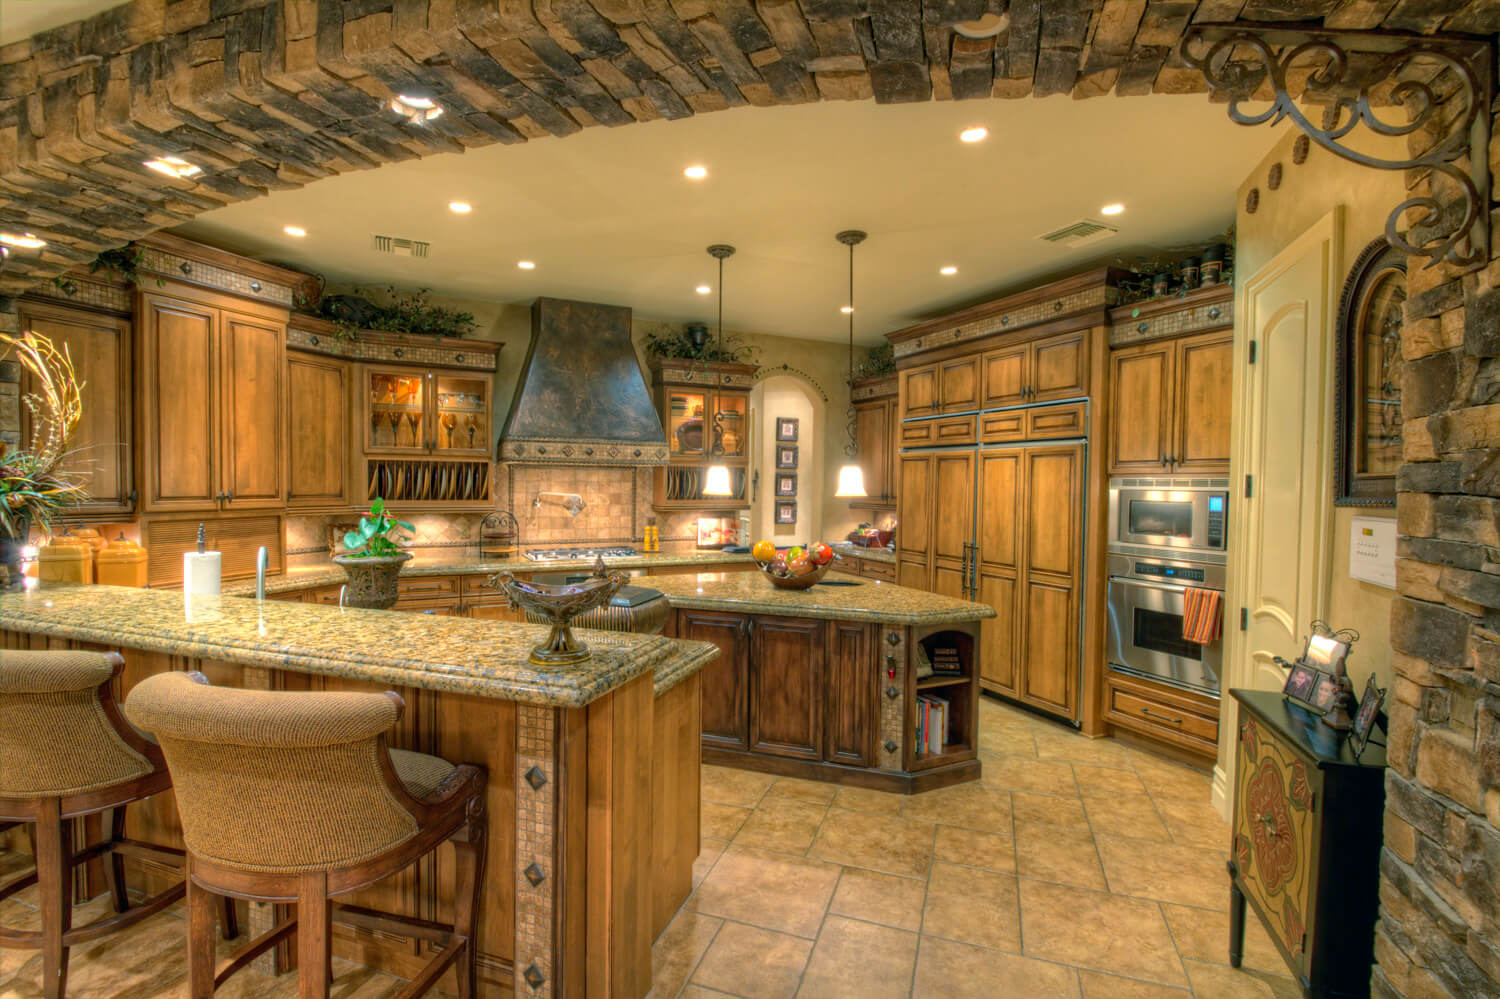 luxurious kitchen with a glitzy light